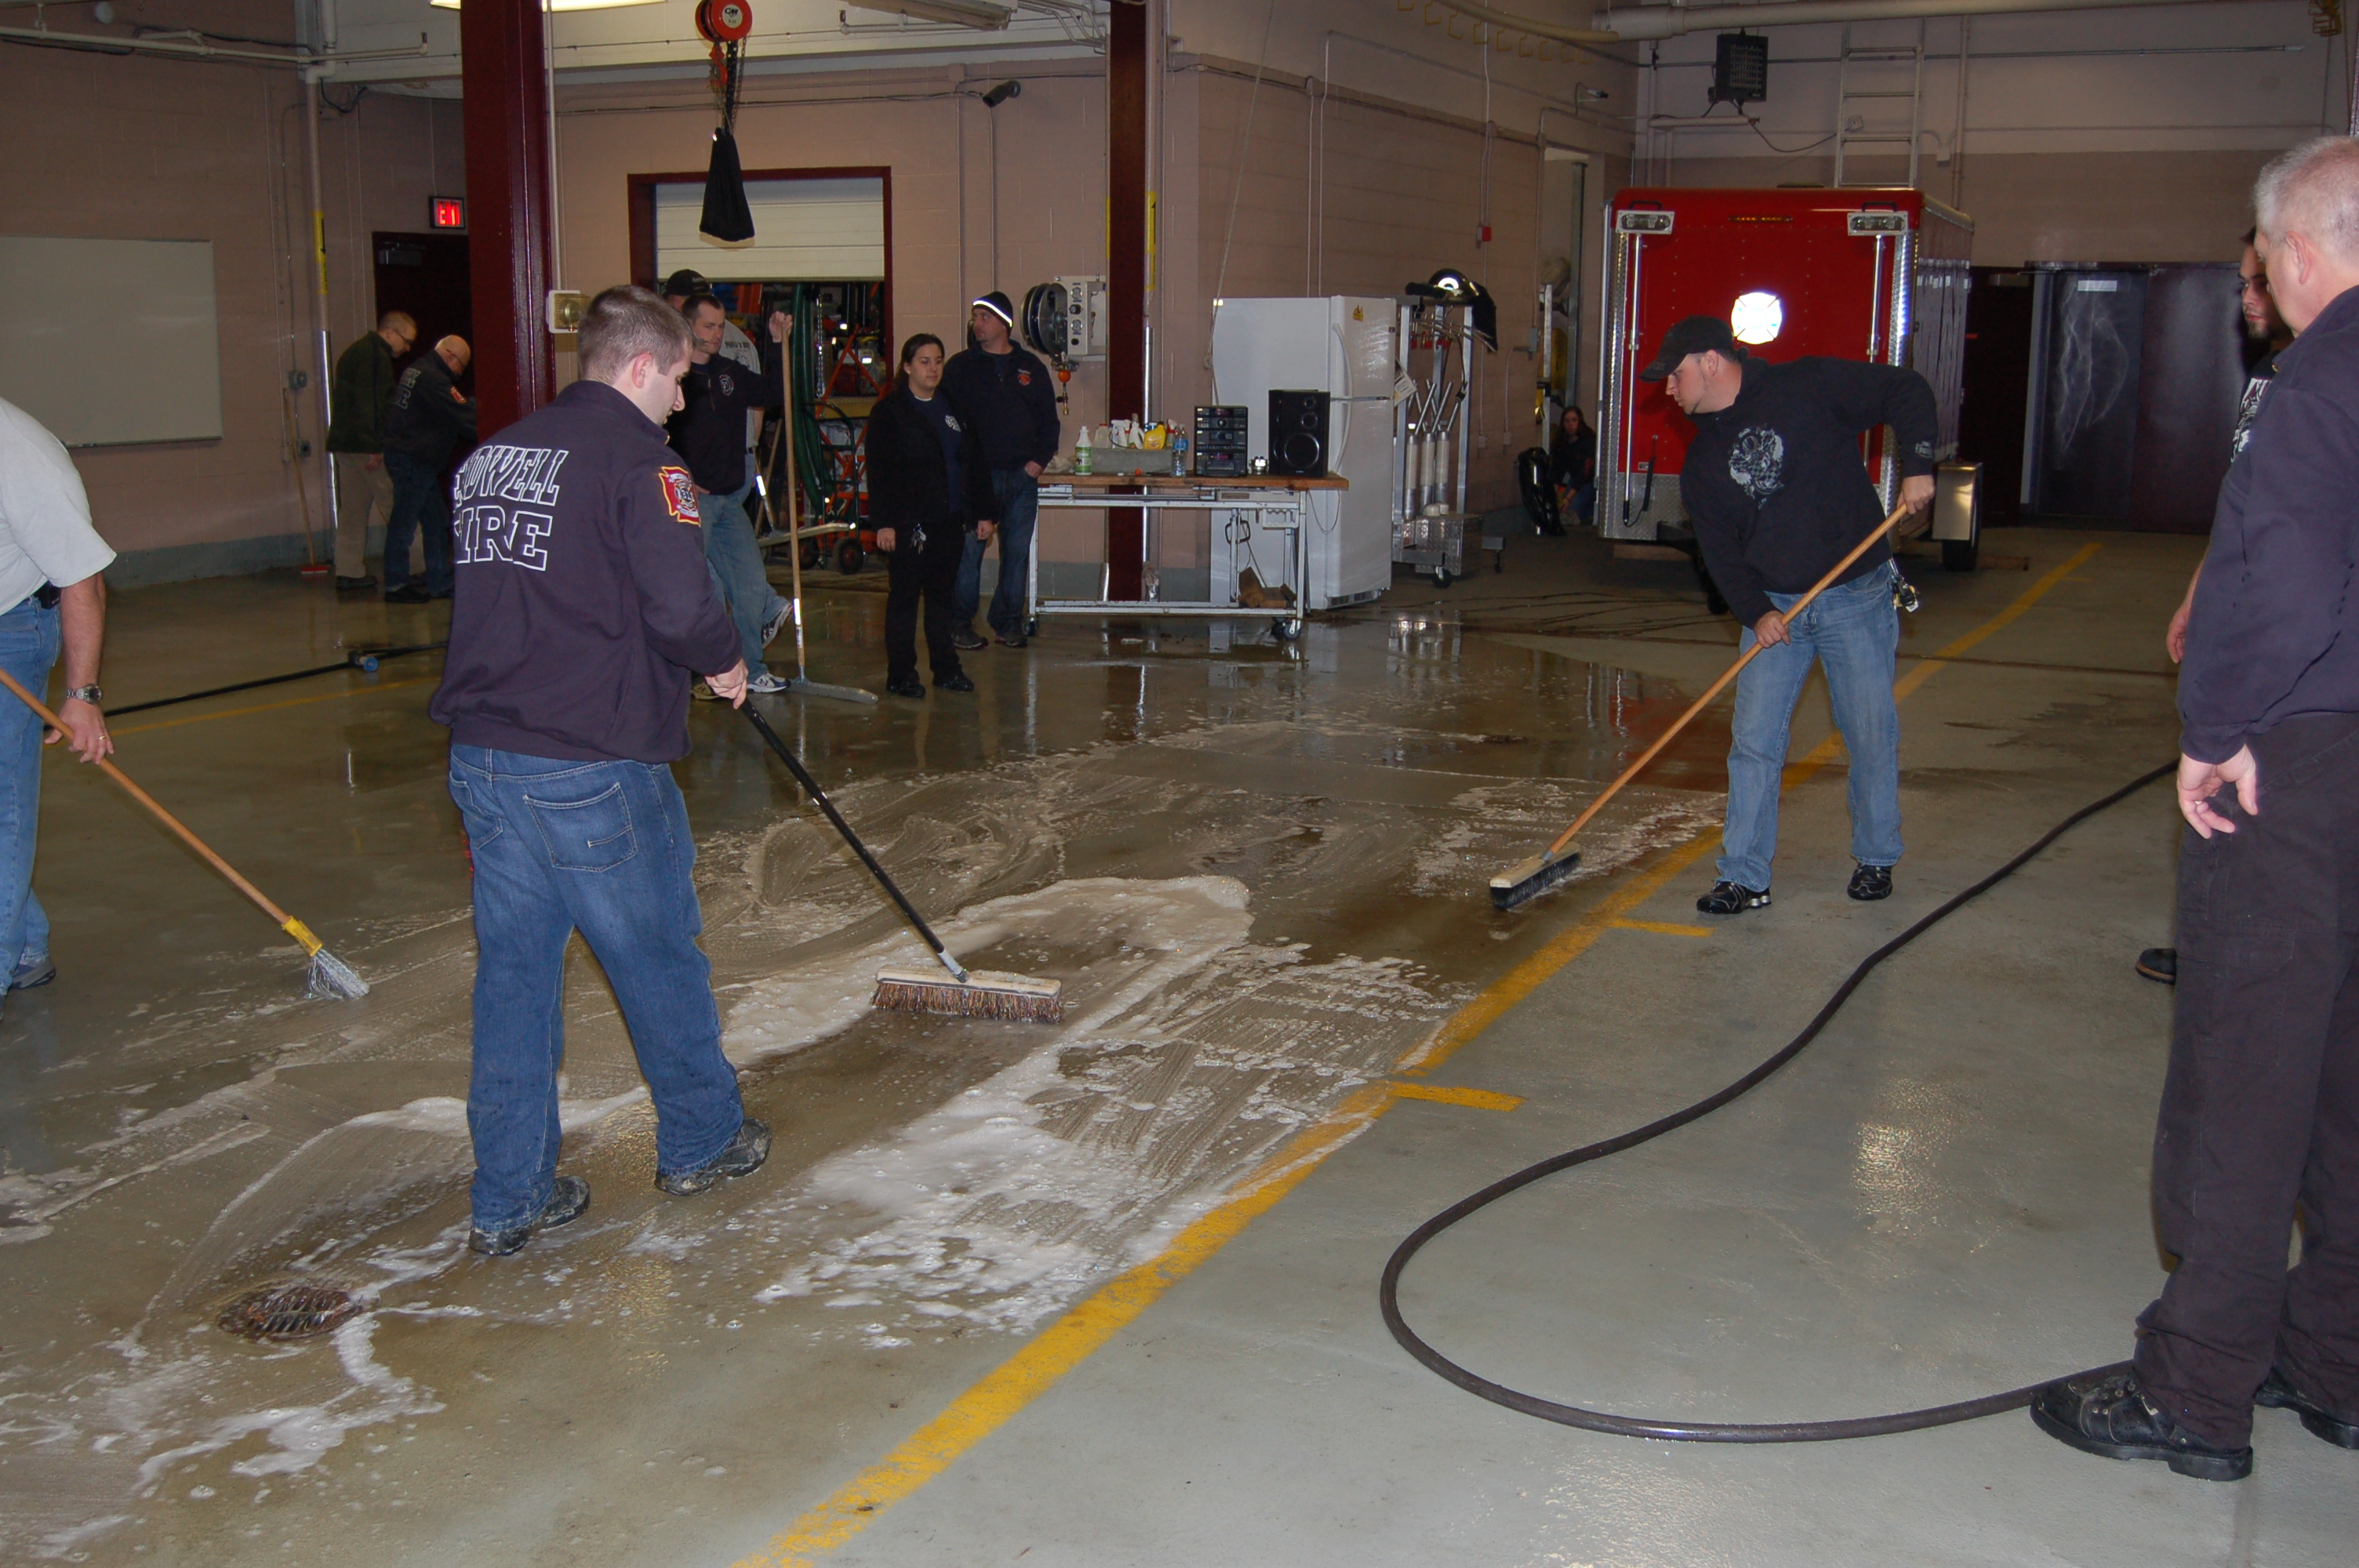 12-19-11  Other - Station Cleanup